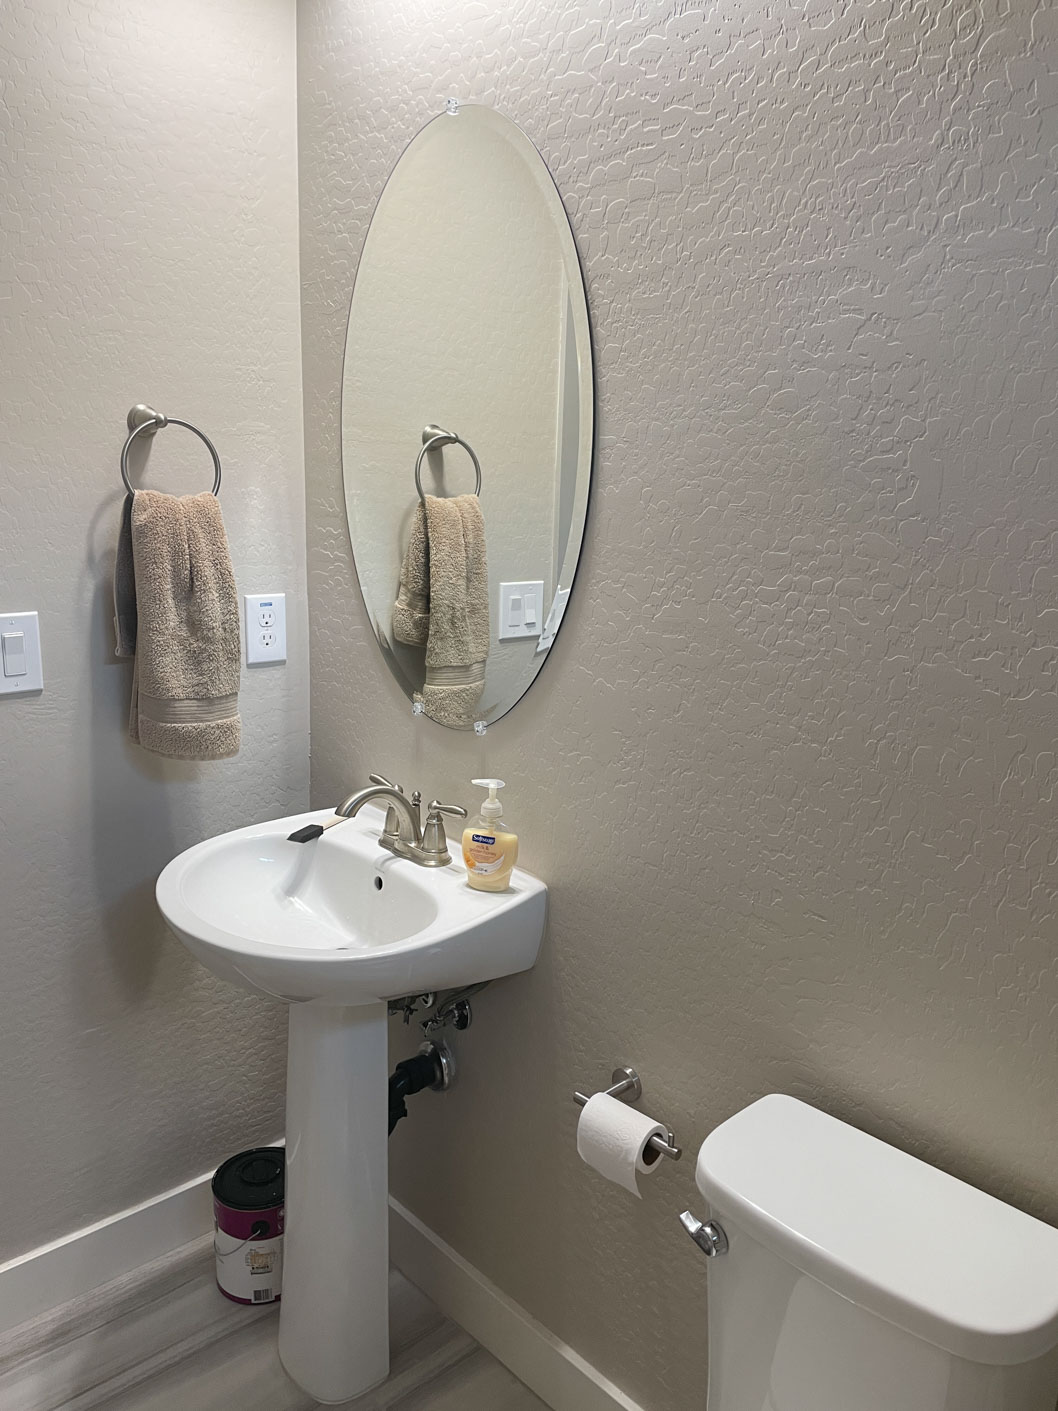 A bathroom with a mirror and sink.